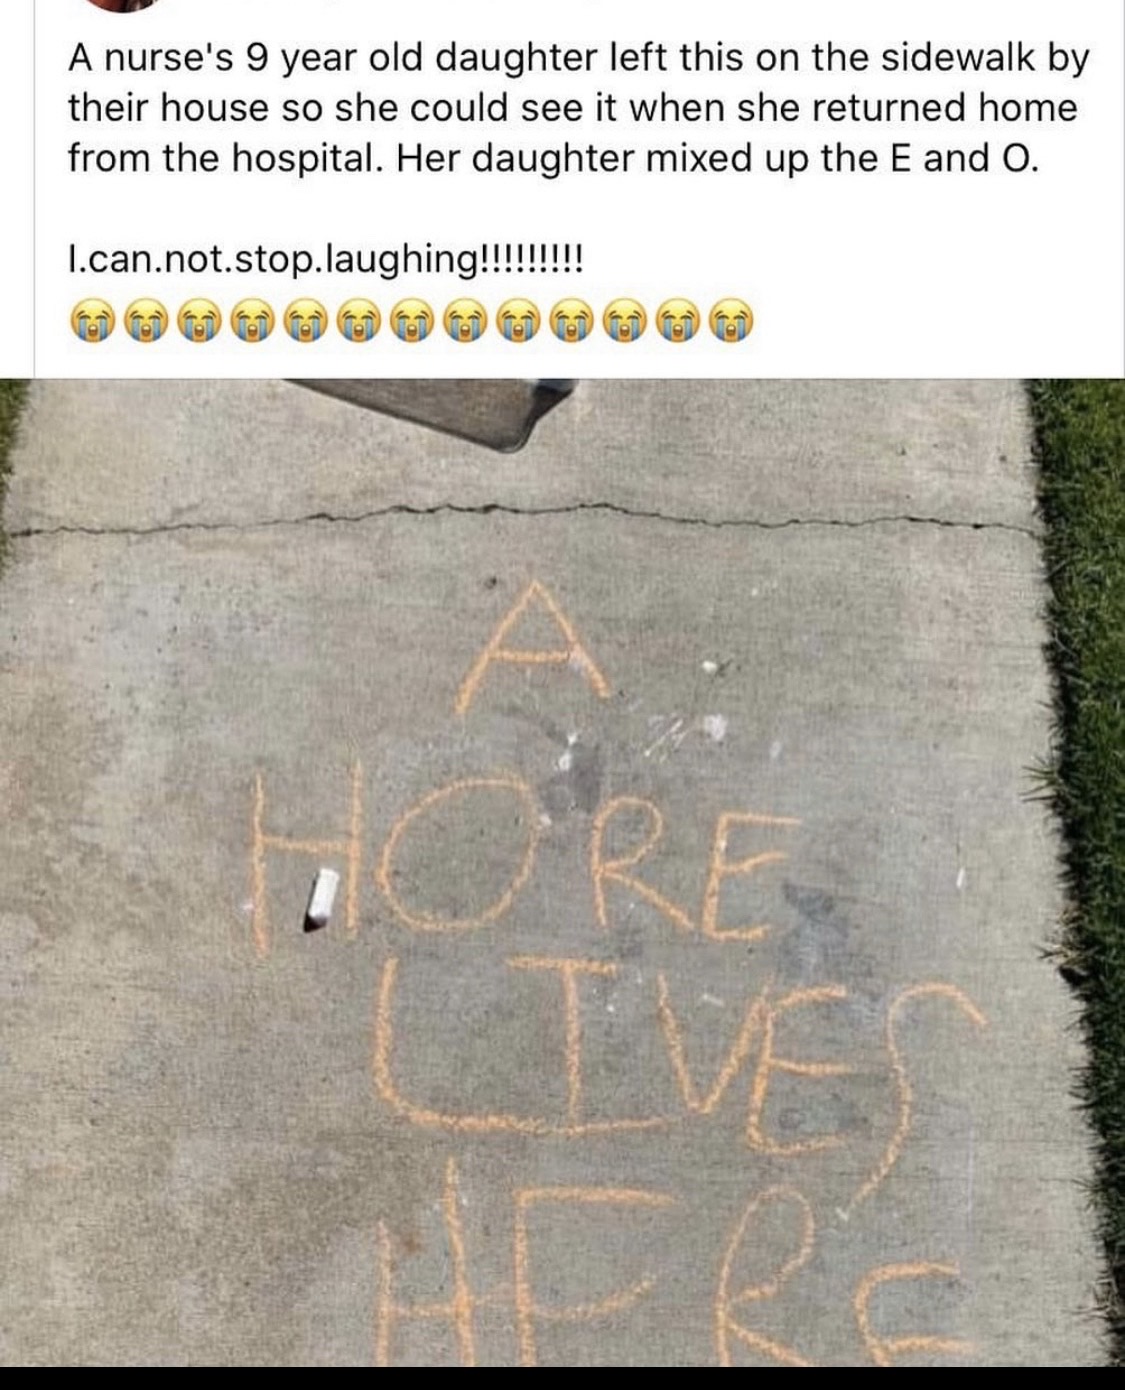 nurse mom hore lives here - A nurse's 9 year old daughter left this on the sidewalk by their house so she could see it when she returned home from the hospital. Her daughter mixed up the E and O. I.can.not.stop.laughing!!!!!!!!! Ve